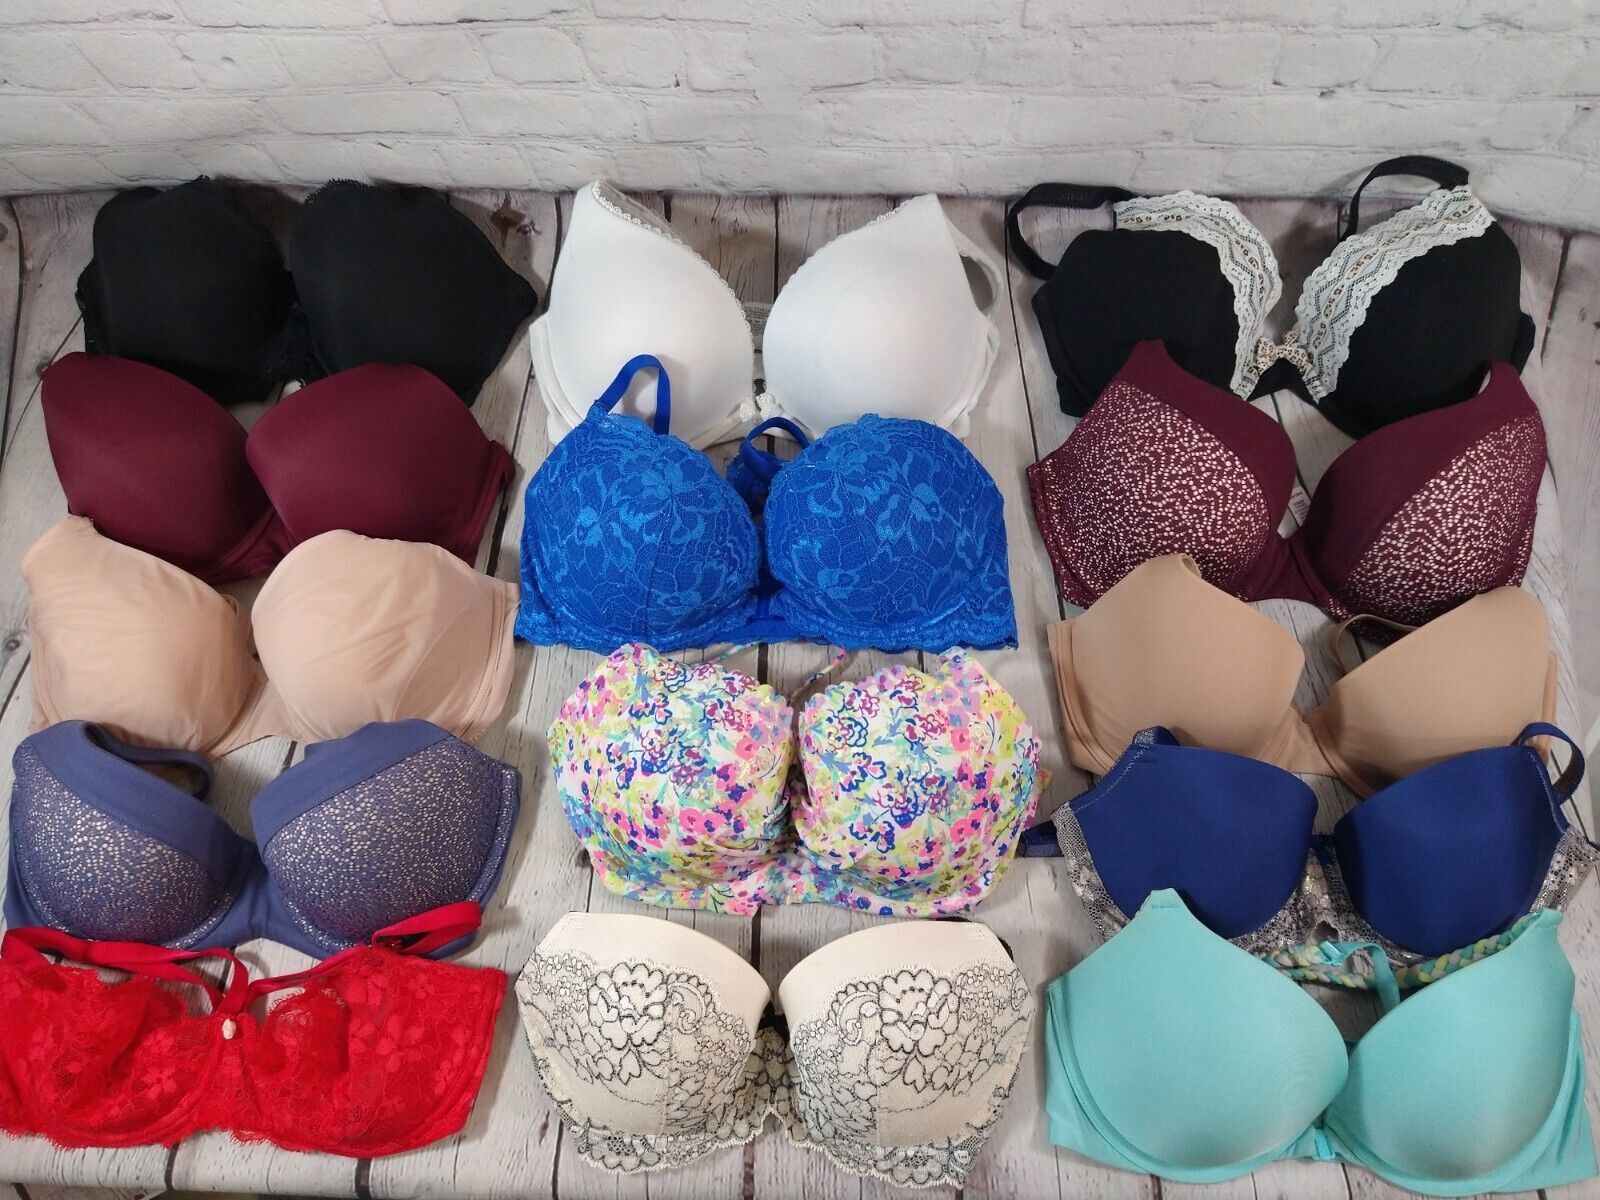 Lot of 14 VICTORIA\'S SECRET & PINK bra / ALL DIFFERENT STYLES - sz 34D / AWESOME